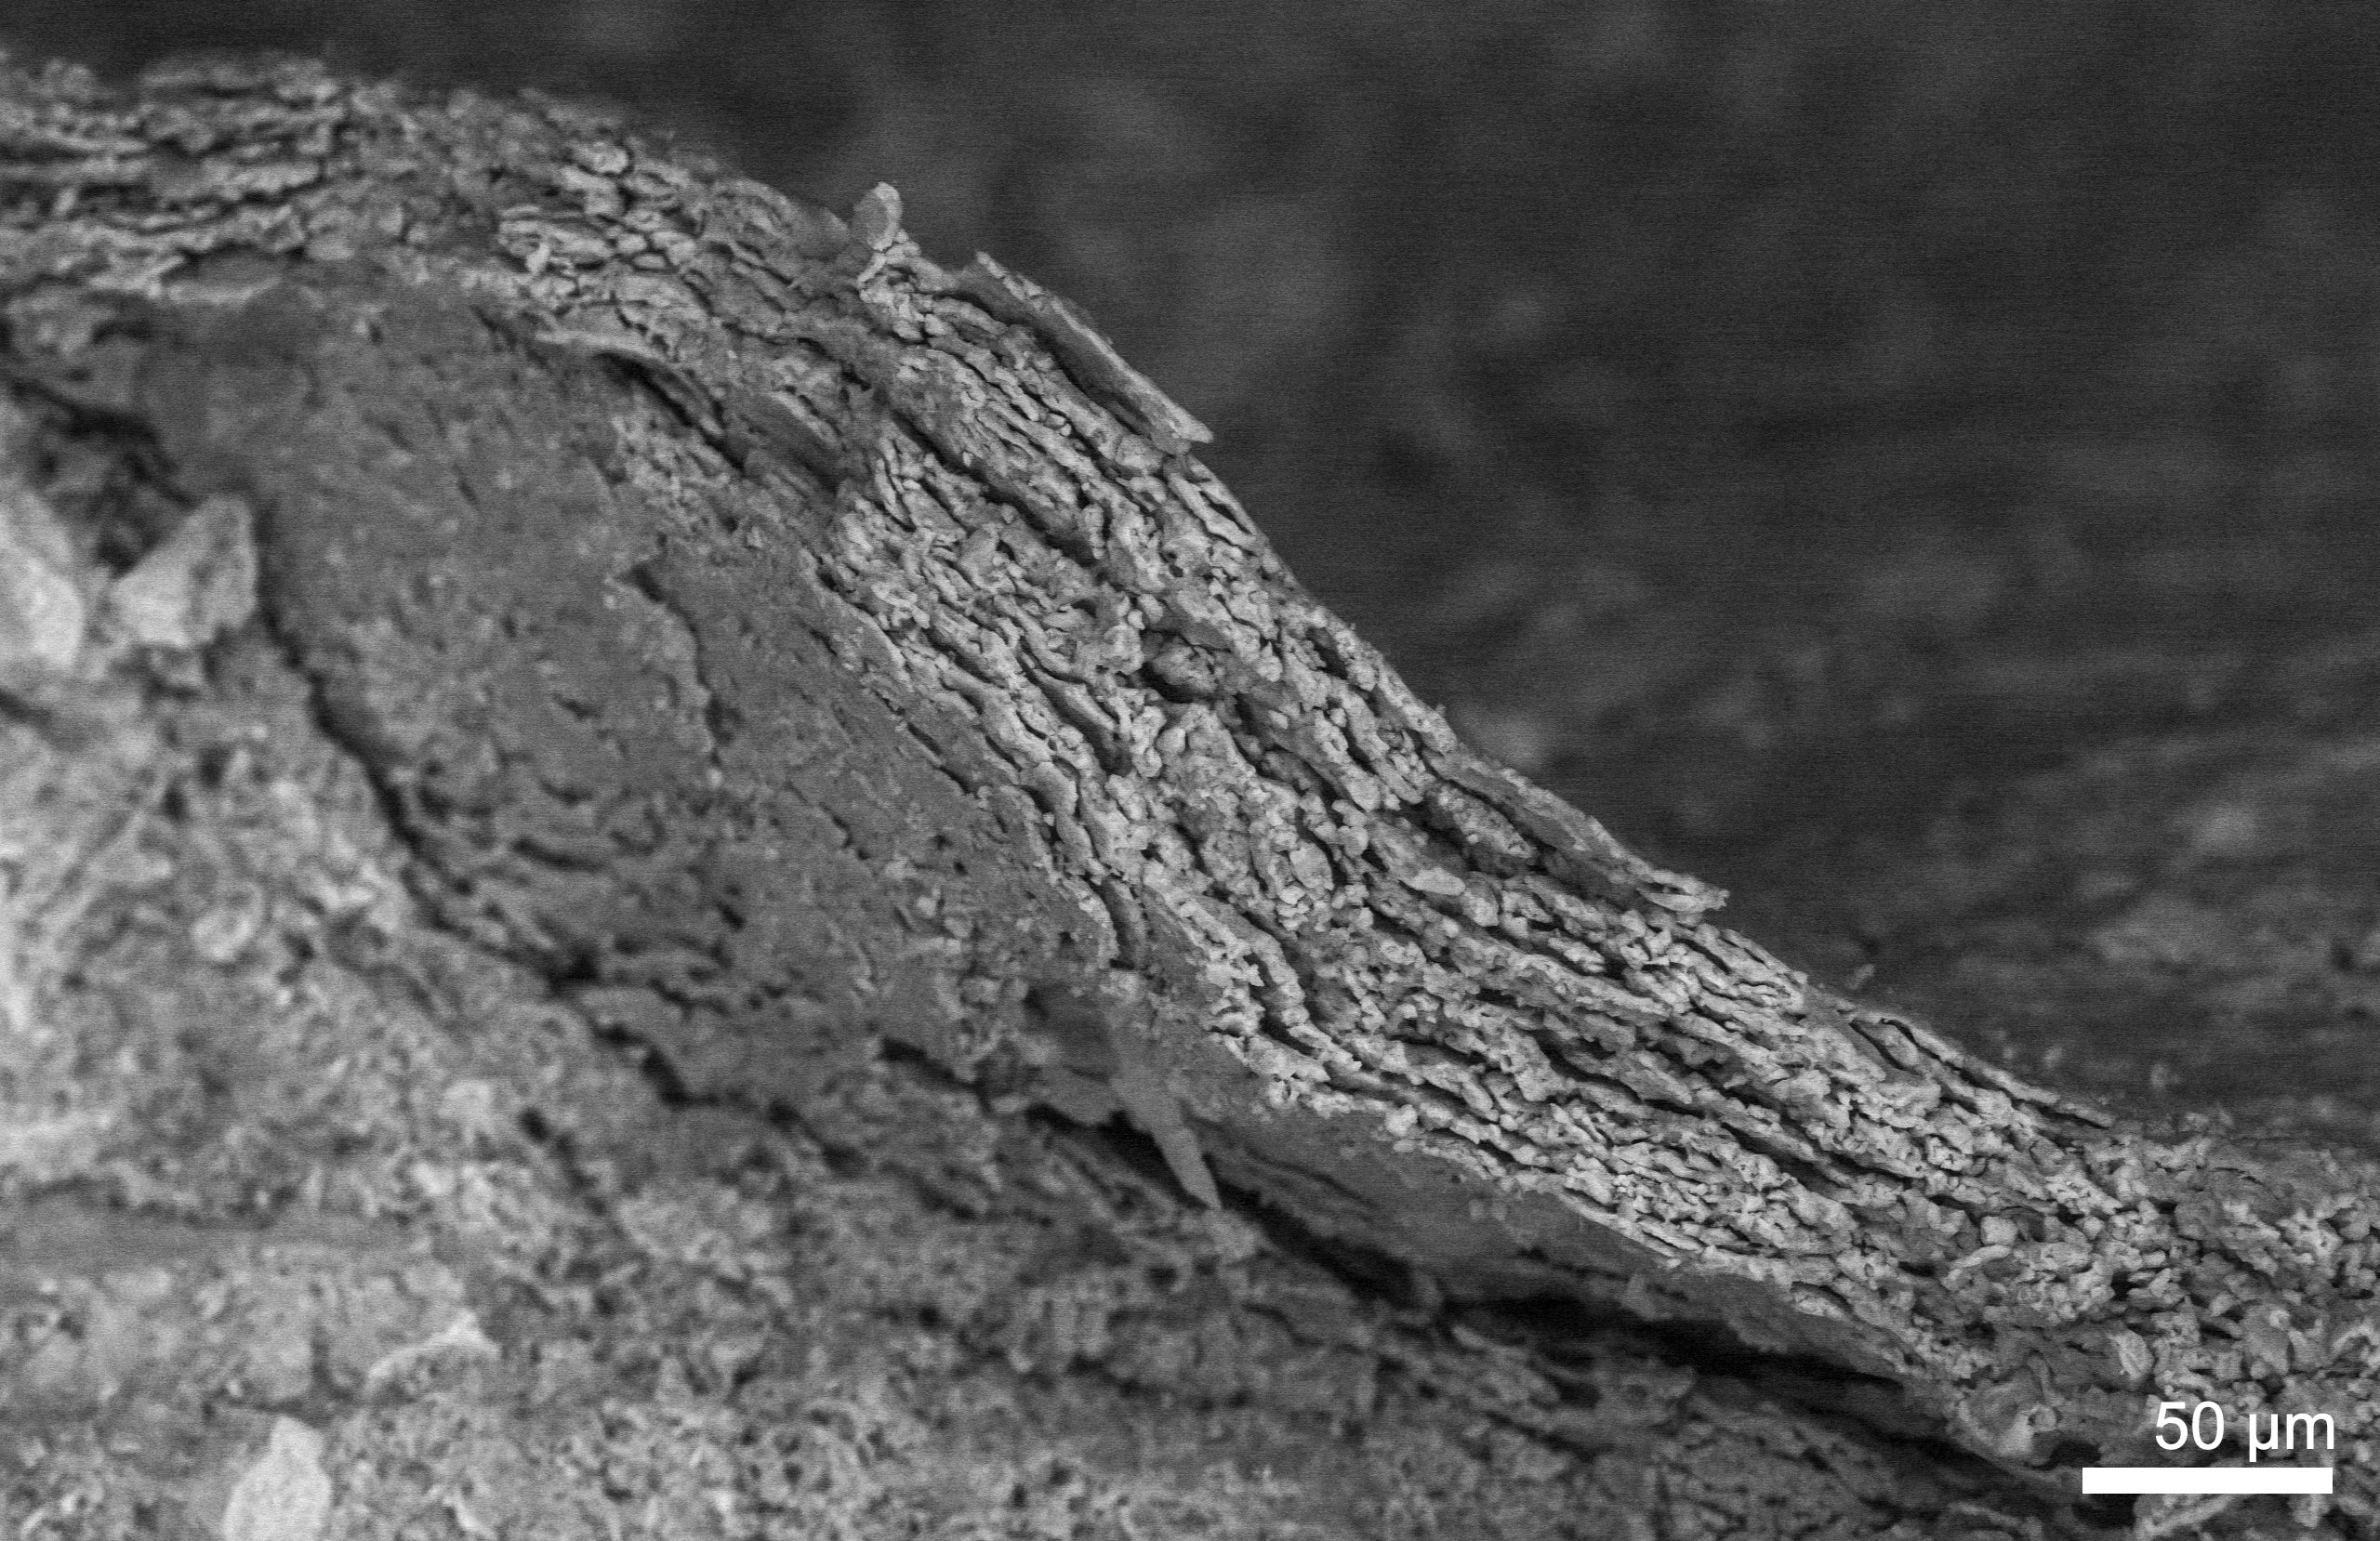 Fossil skin under an electron microscope, showing mineralised cell layers